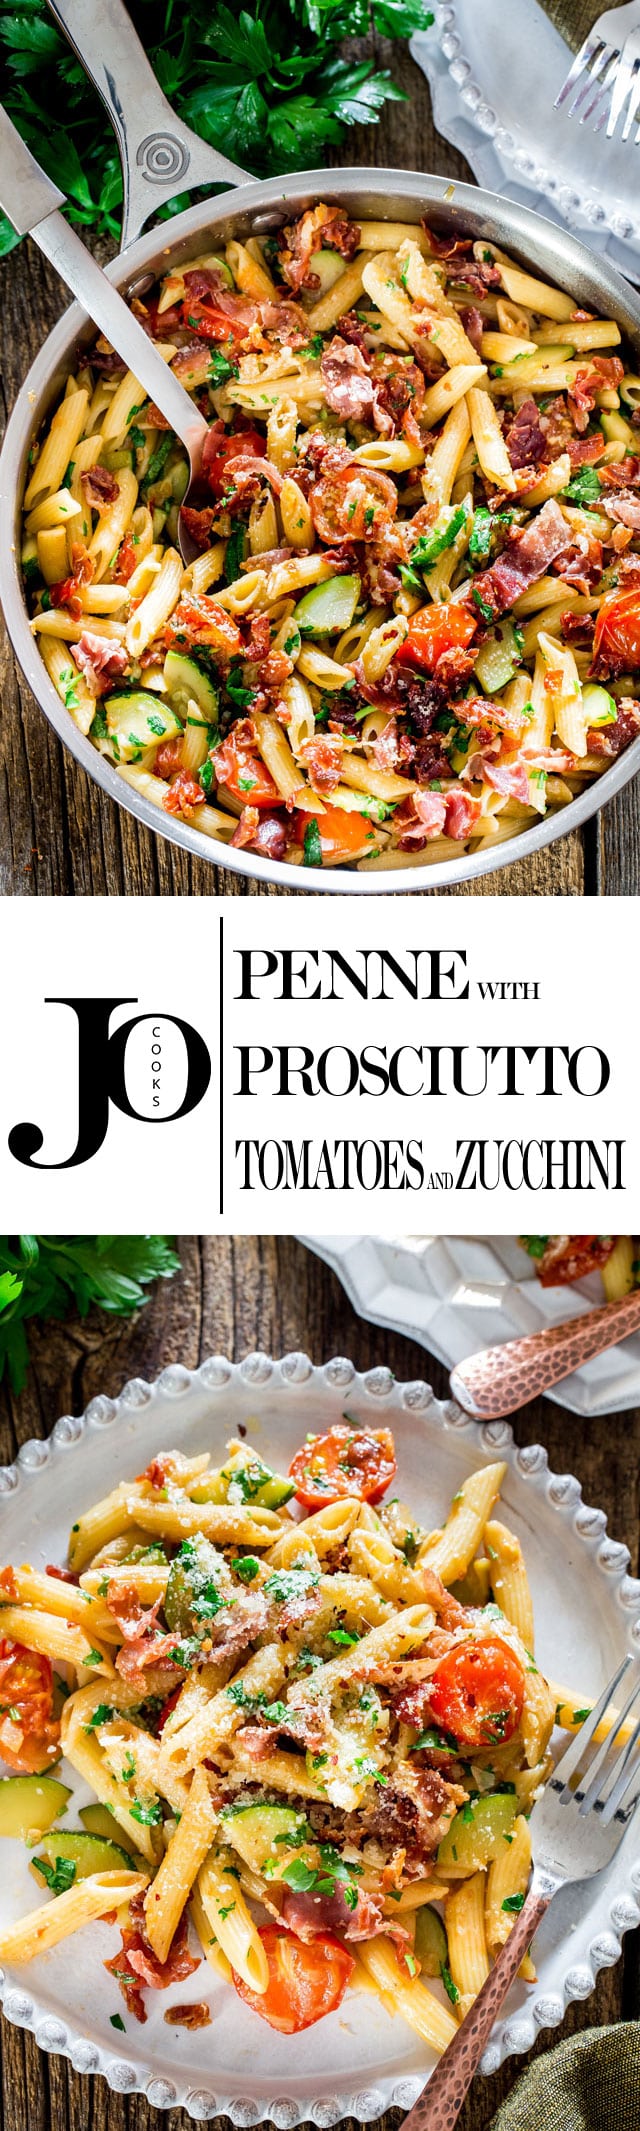 penne with prosciutto, tomatoes and zucchini